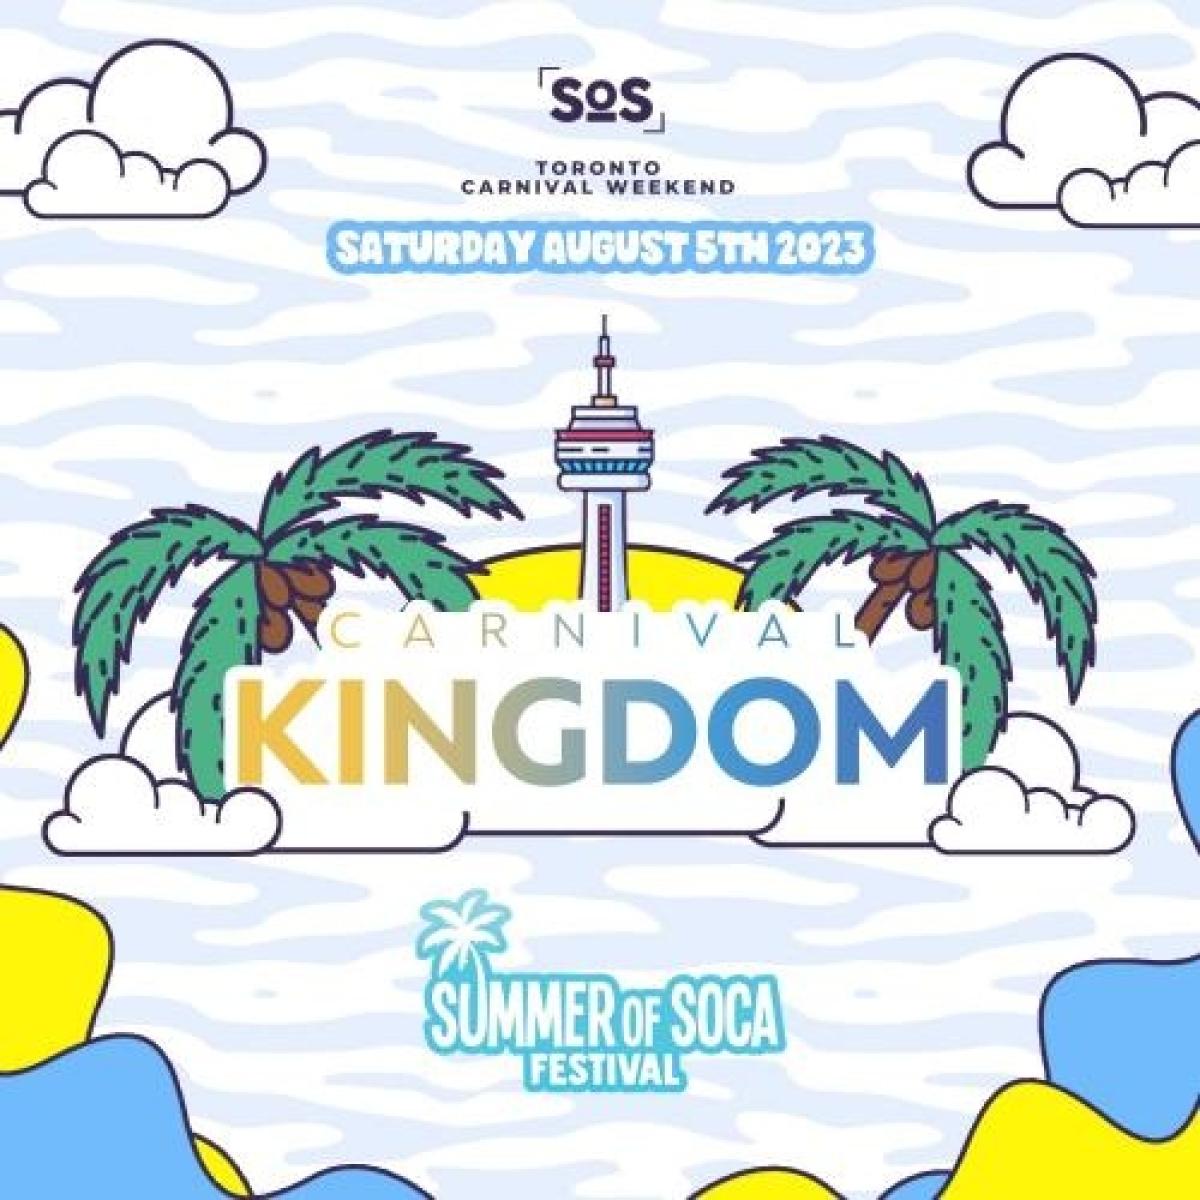 Carnival Kingdom | The Concert - SOS Fest  flyer or graphic.